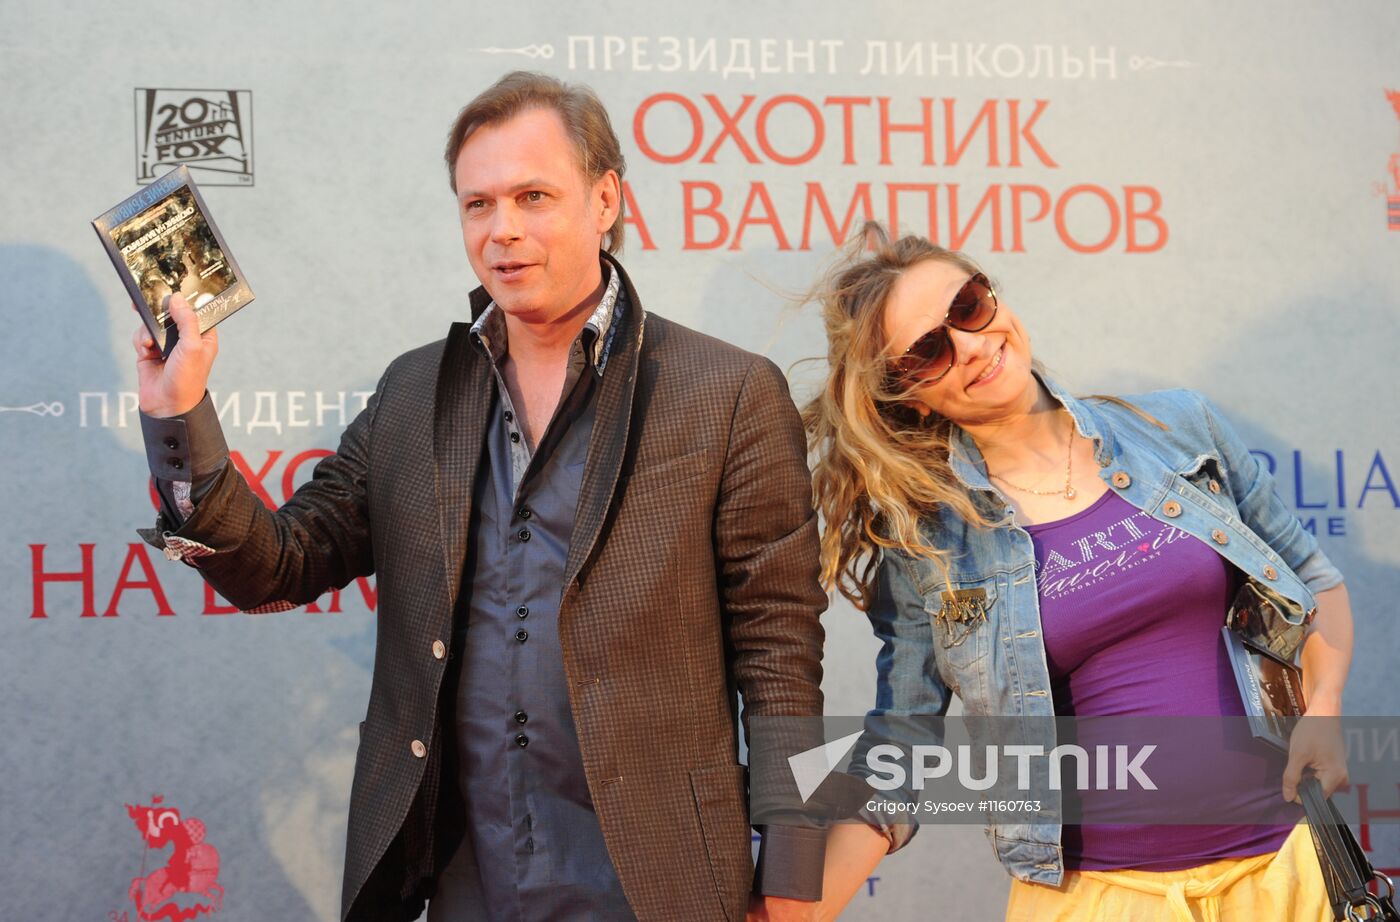 Abraham Lincoln: Vampire Hunter premiere in Moscow